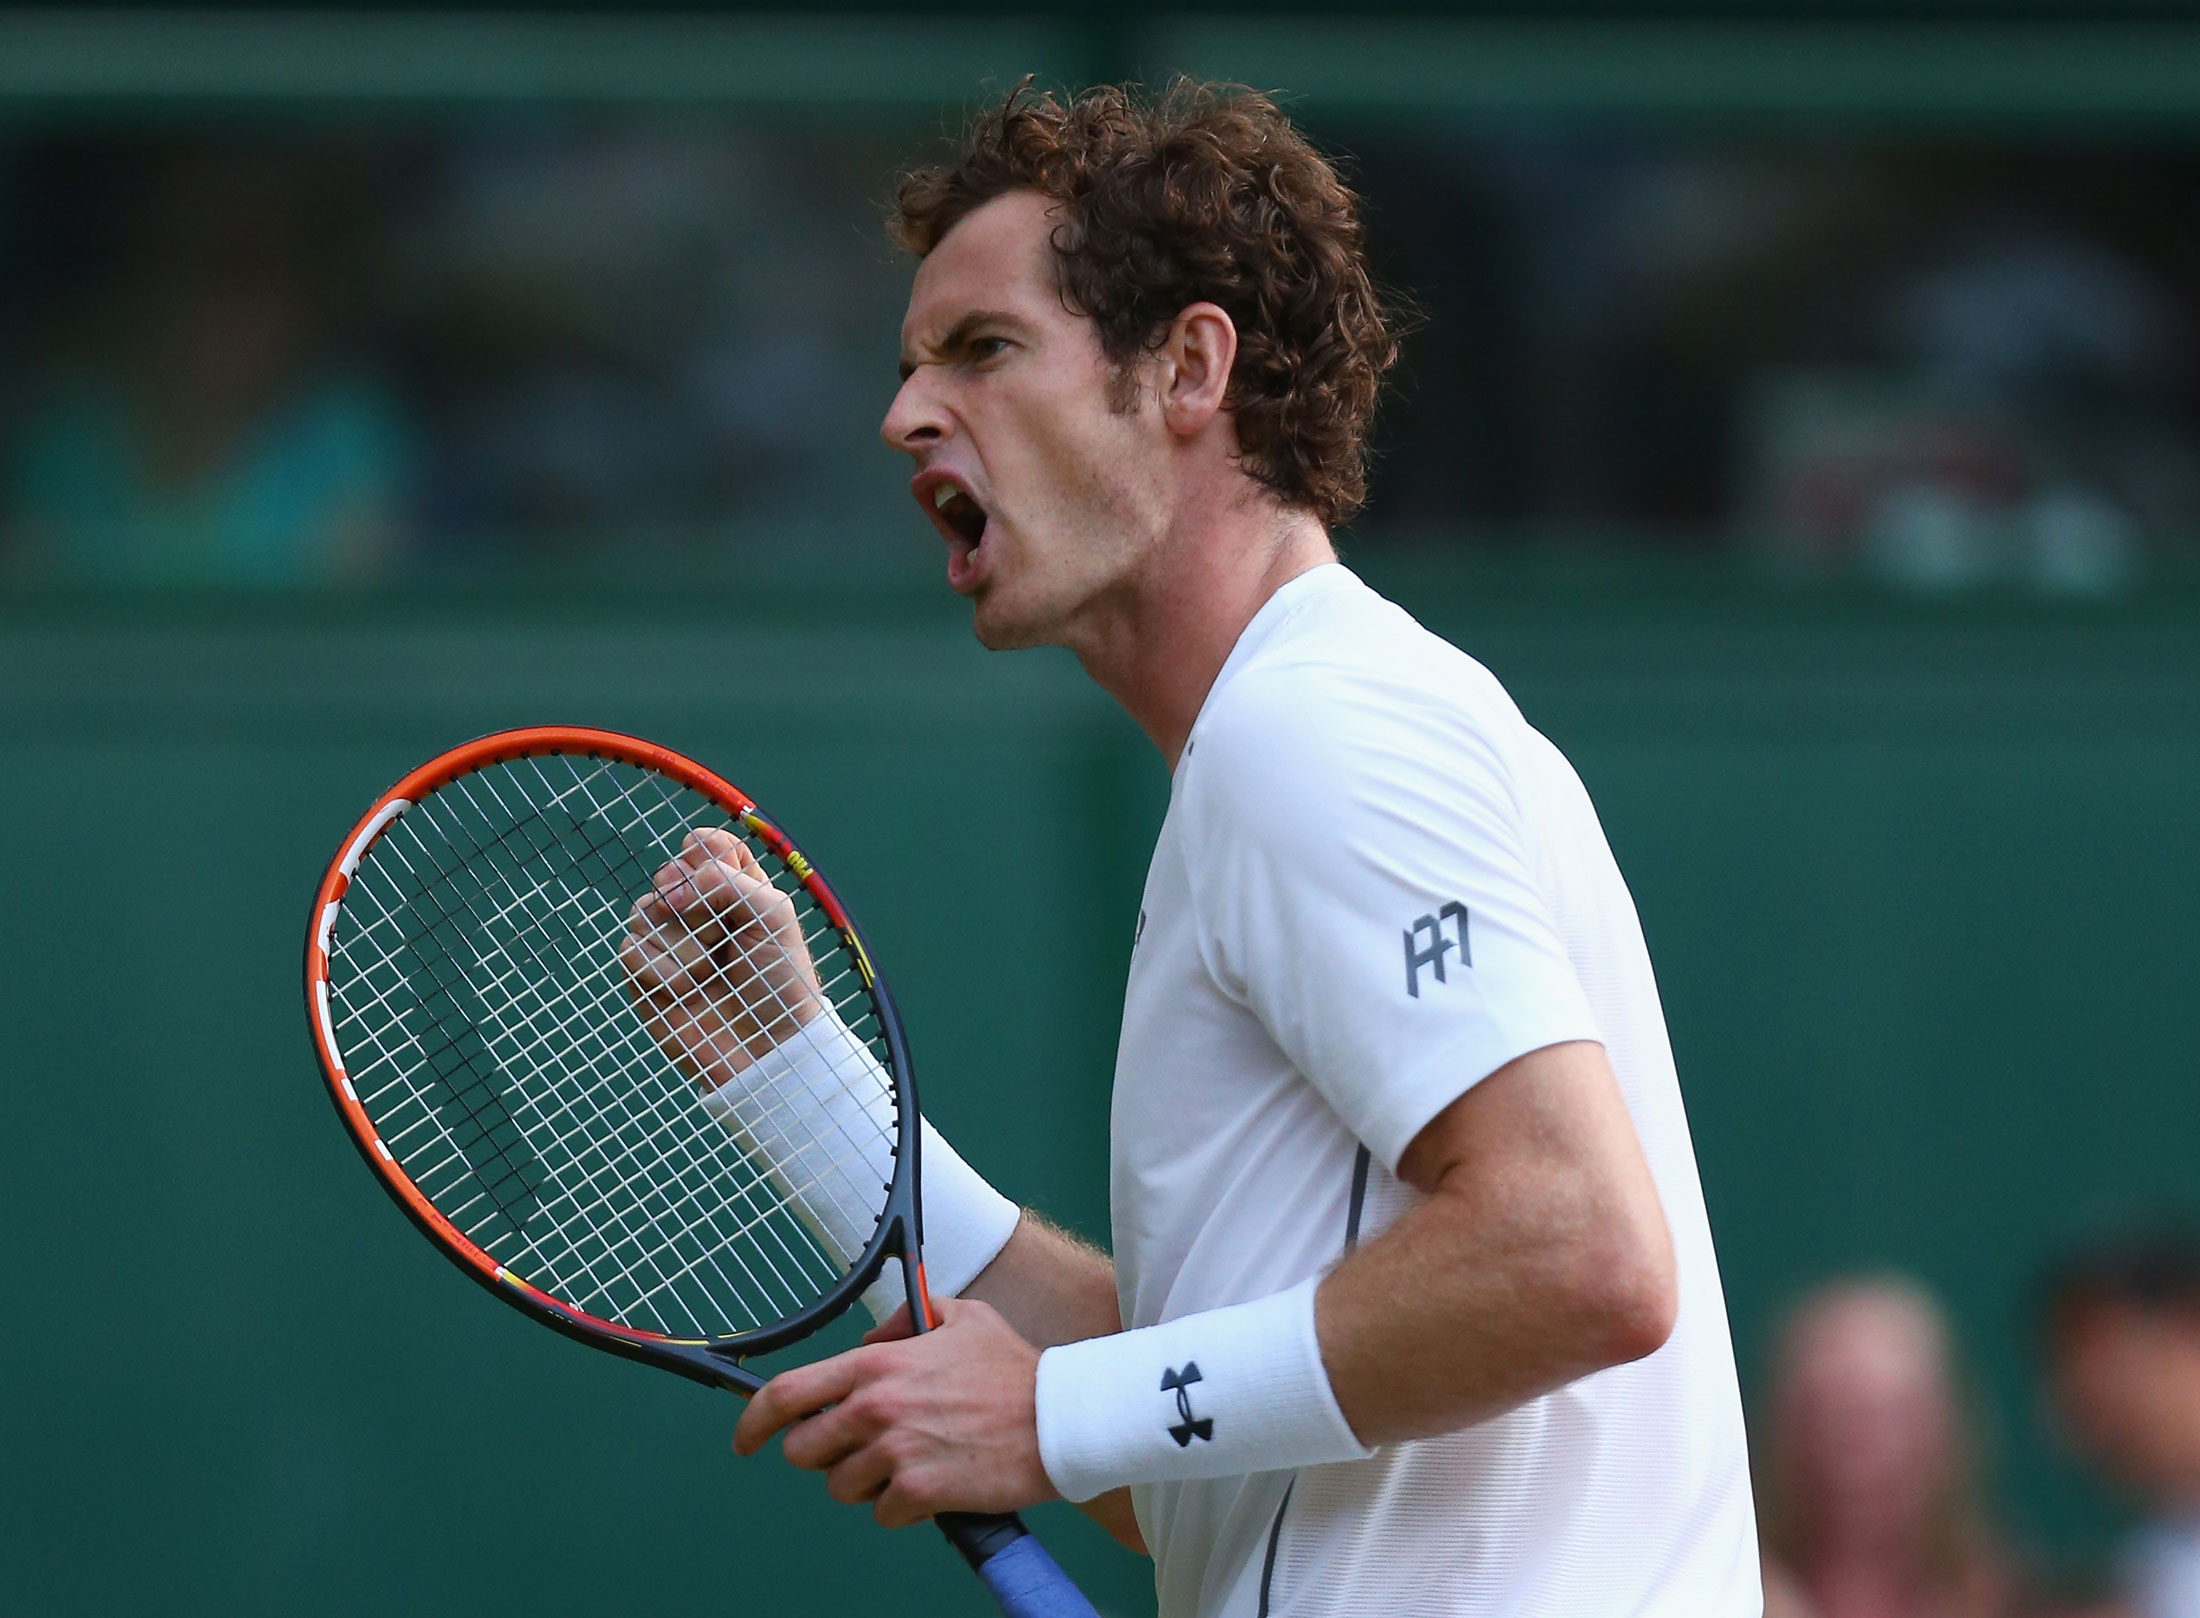 Murray makes $19.2 million a year from prize money and endorsements, according to a Forbes estimate from August.
